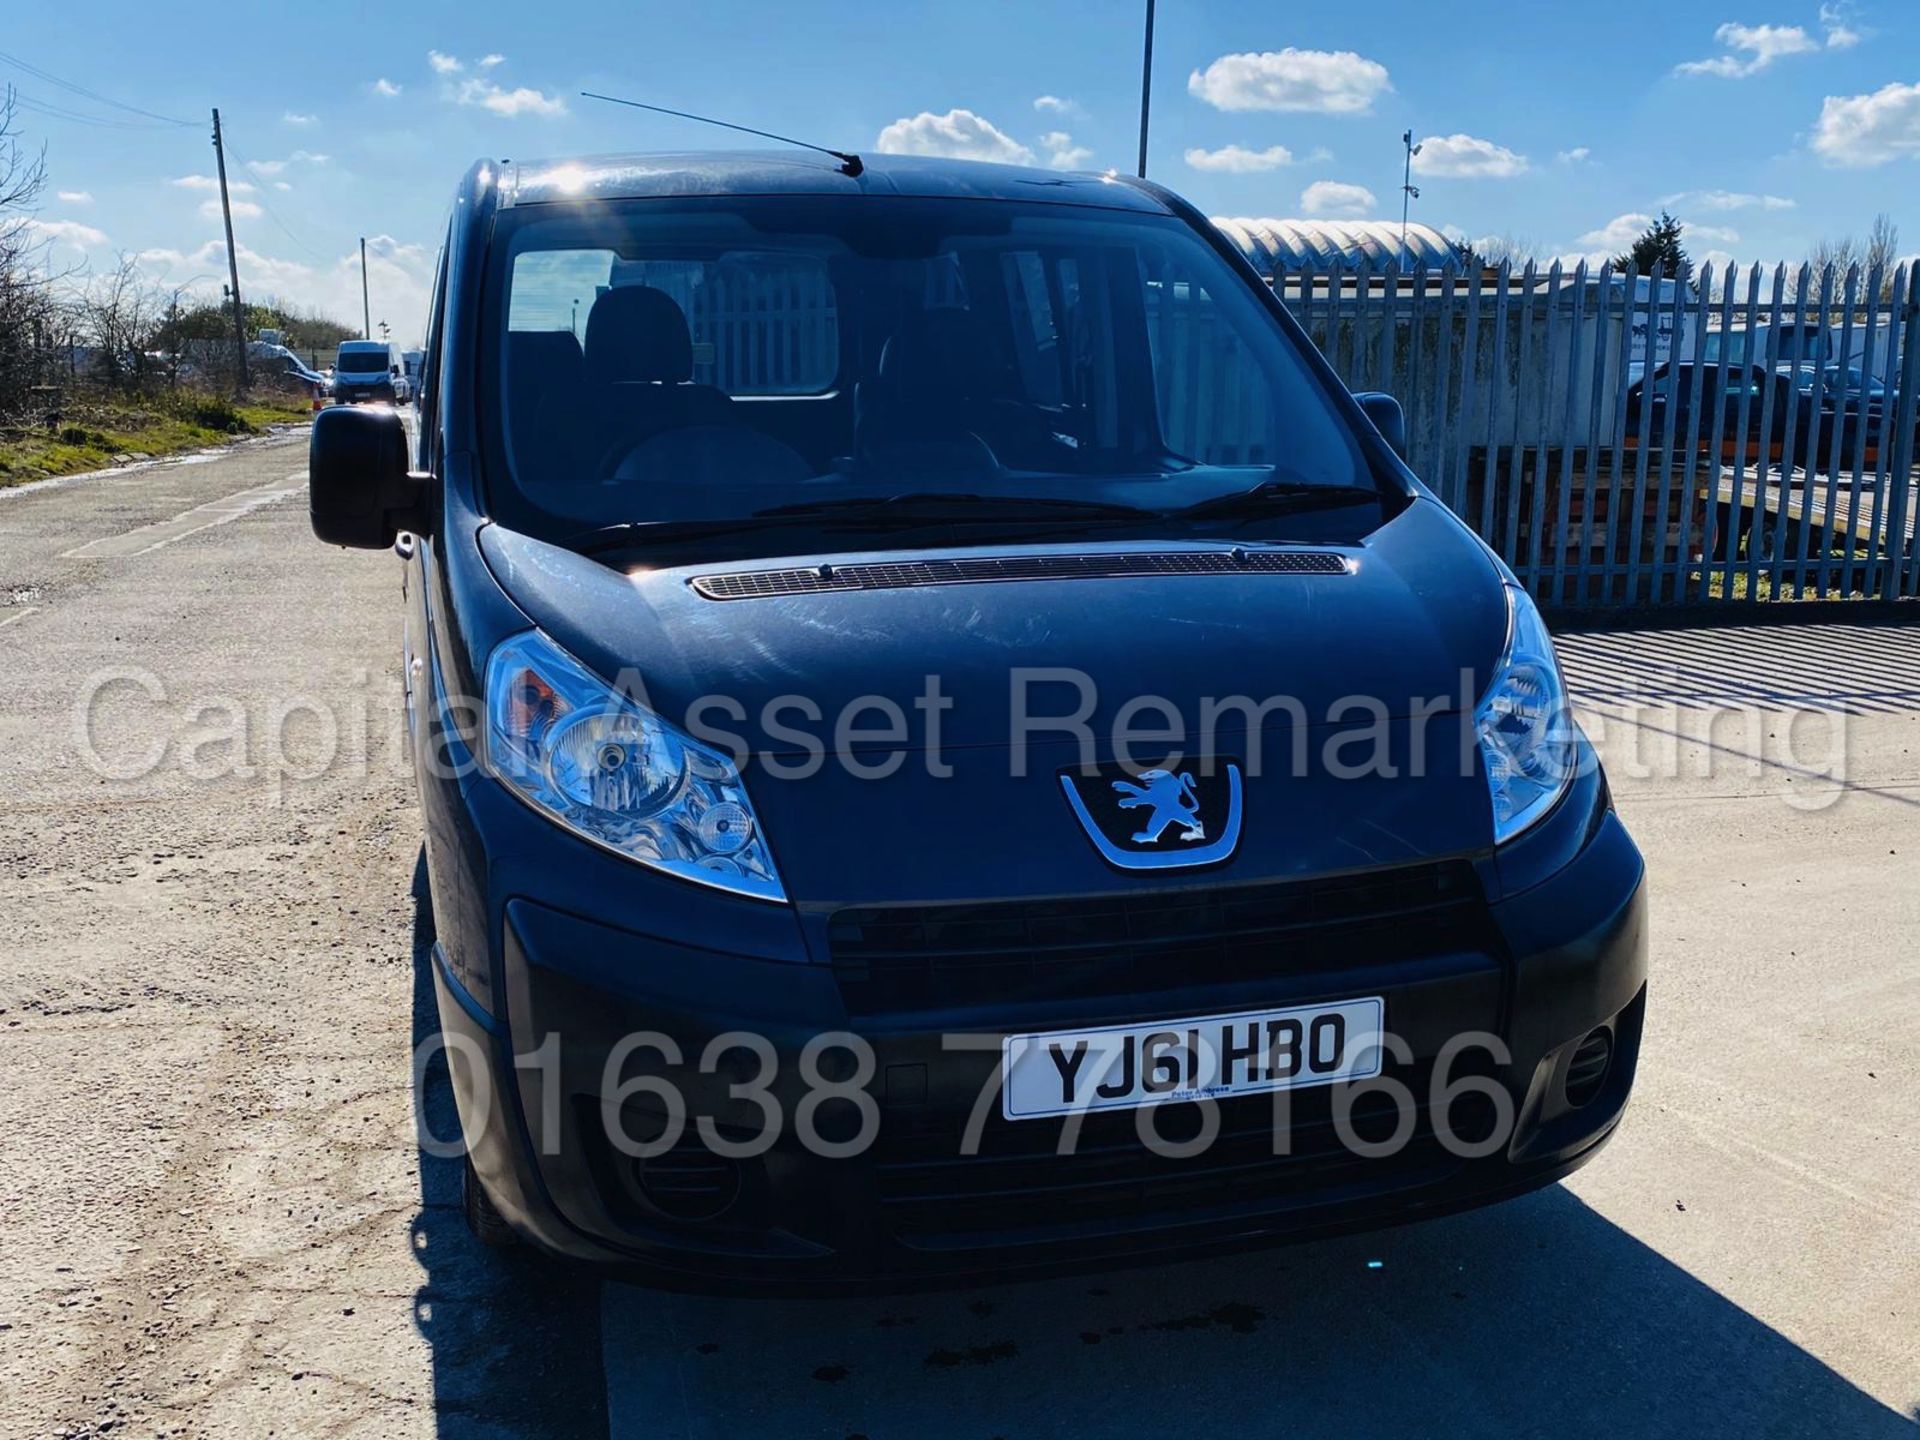 (On Sale) PEUGEOT EXPERT *TEPEE COMFORT* (61 REG) *DISABILITY / WHEEL CHAIR ACCESS VEHICLE* (NO VAT) - Image 10 of 30